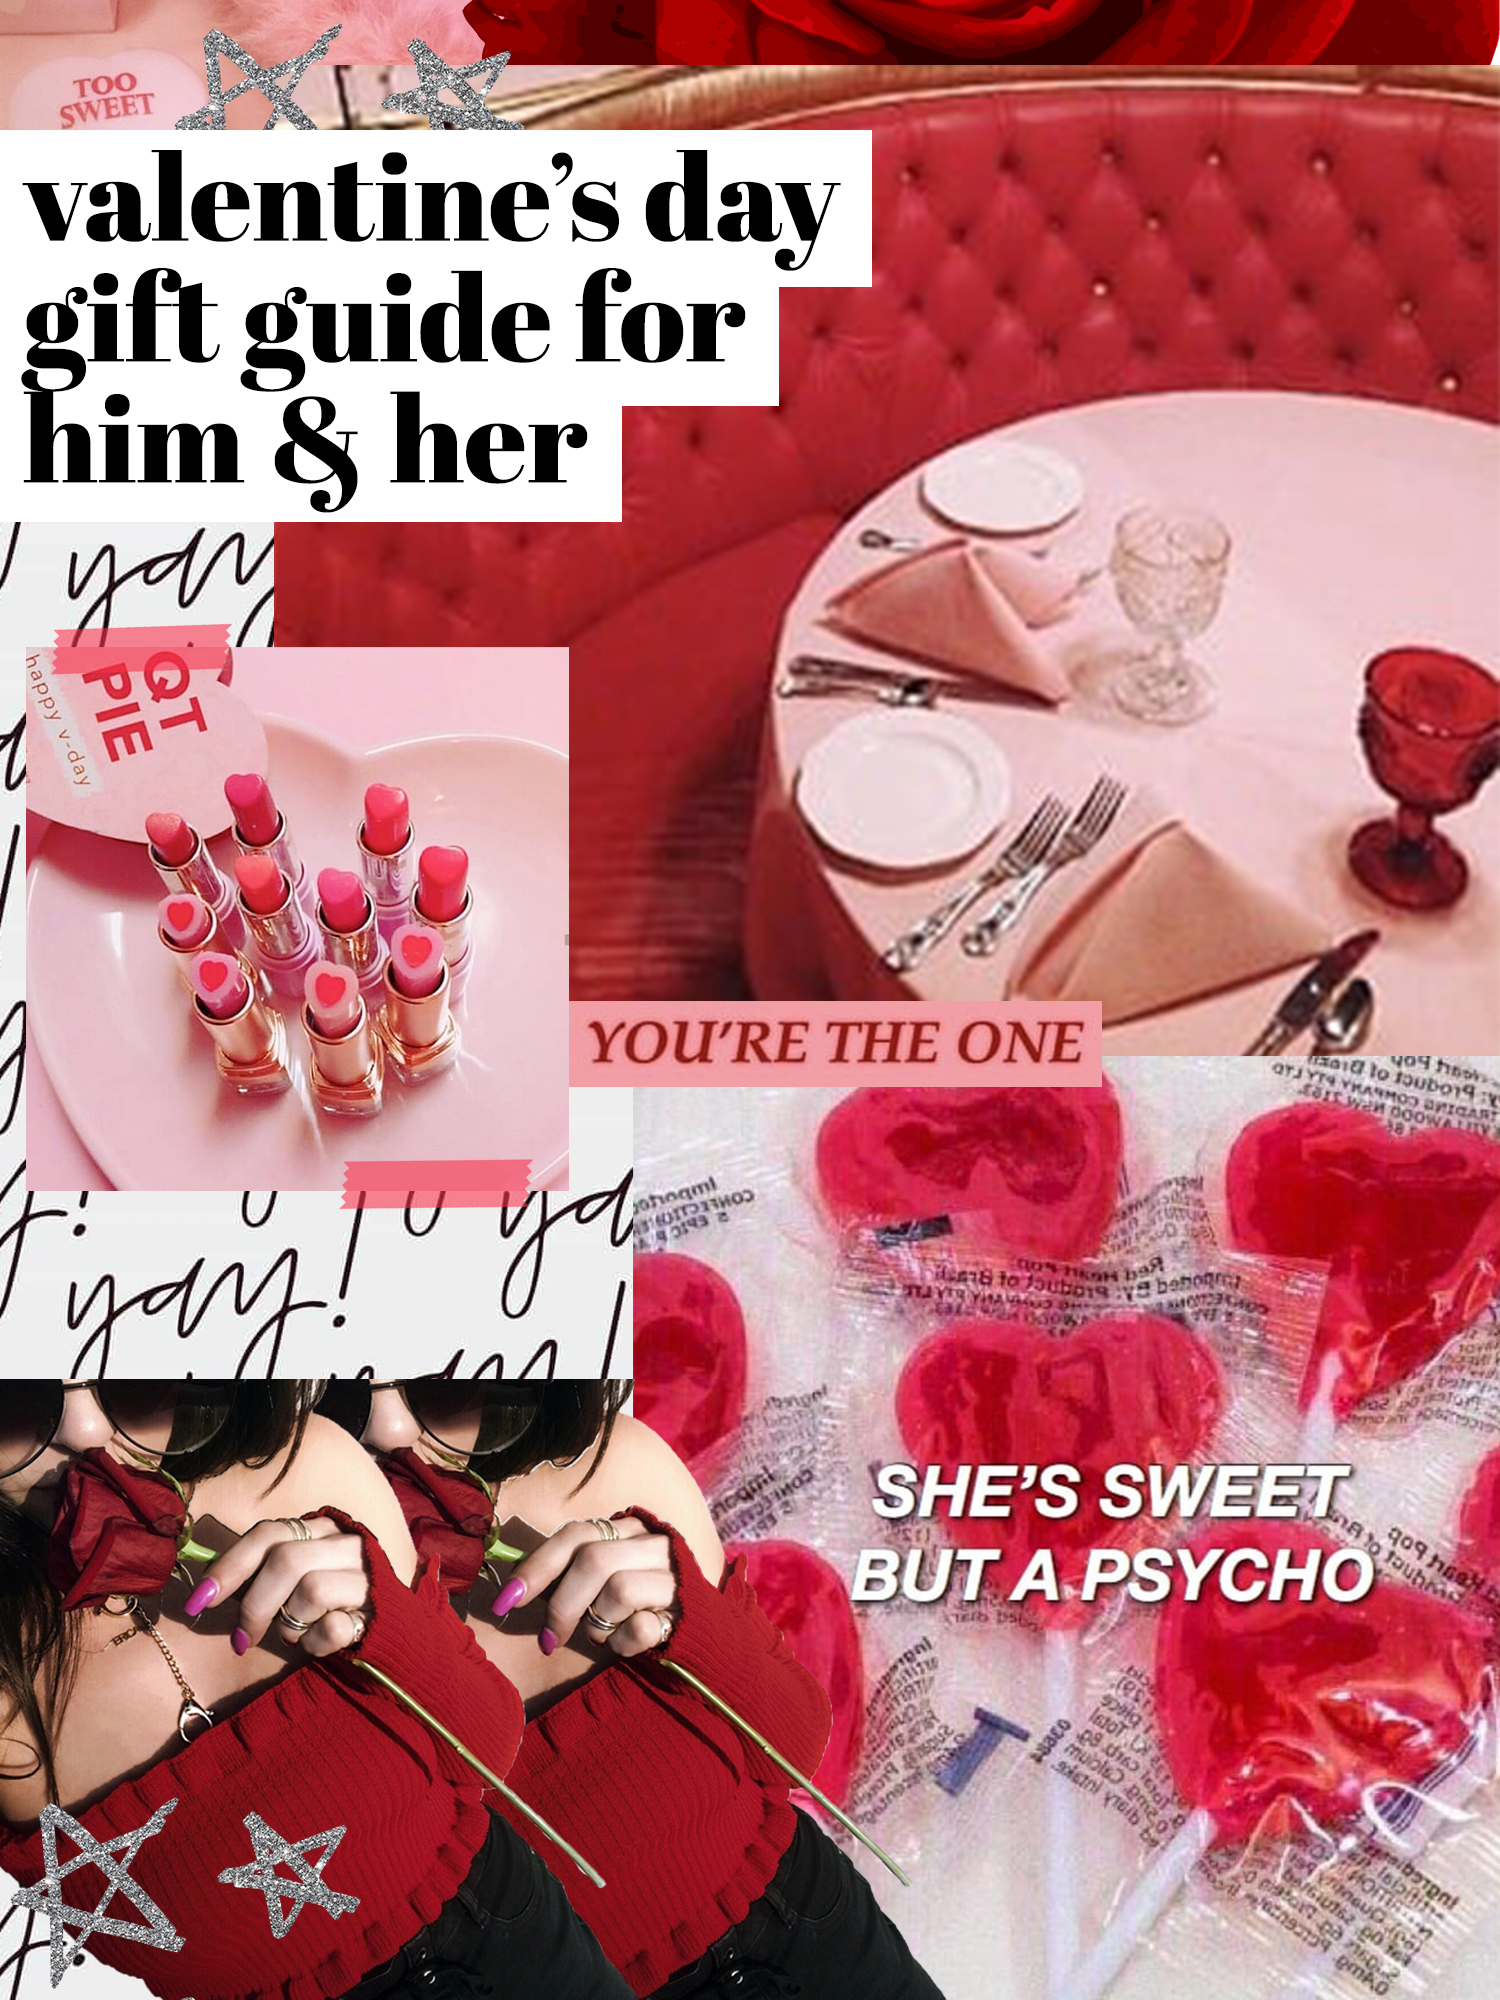 https://www.fashionlush.com/wp-content/uploads/2019/02/valentines-day-gift-guide-1.png